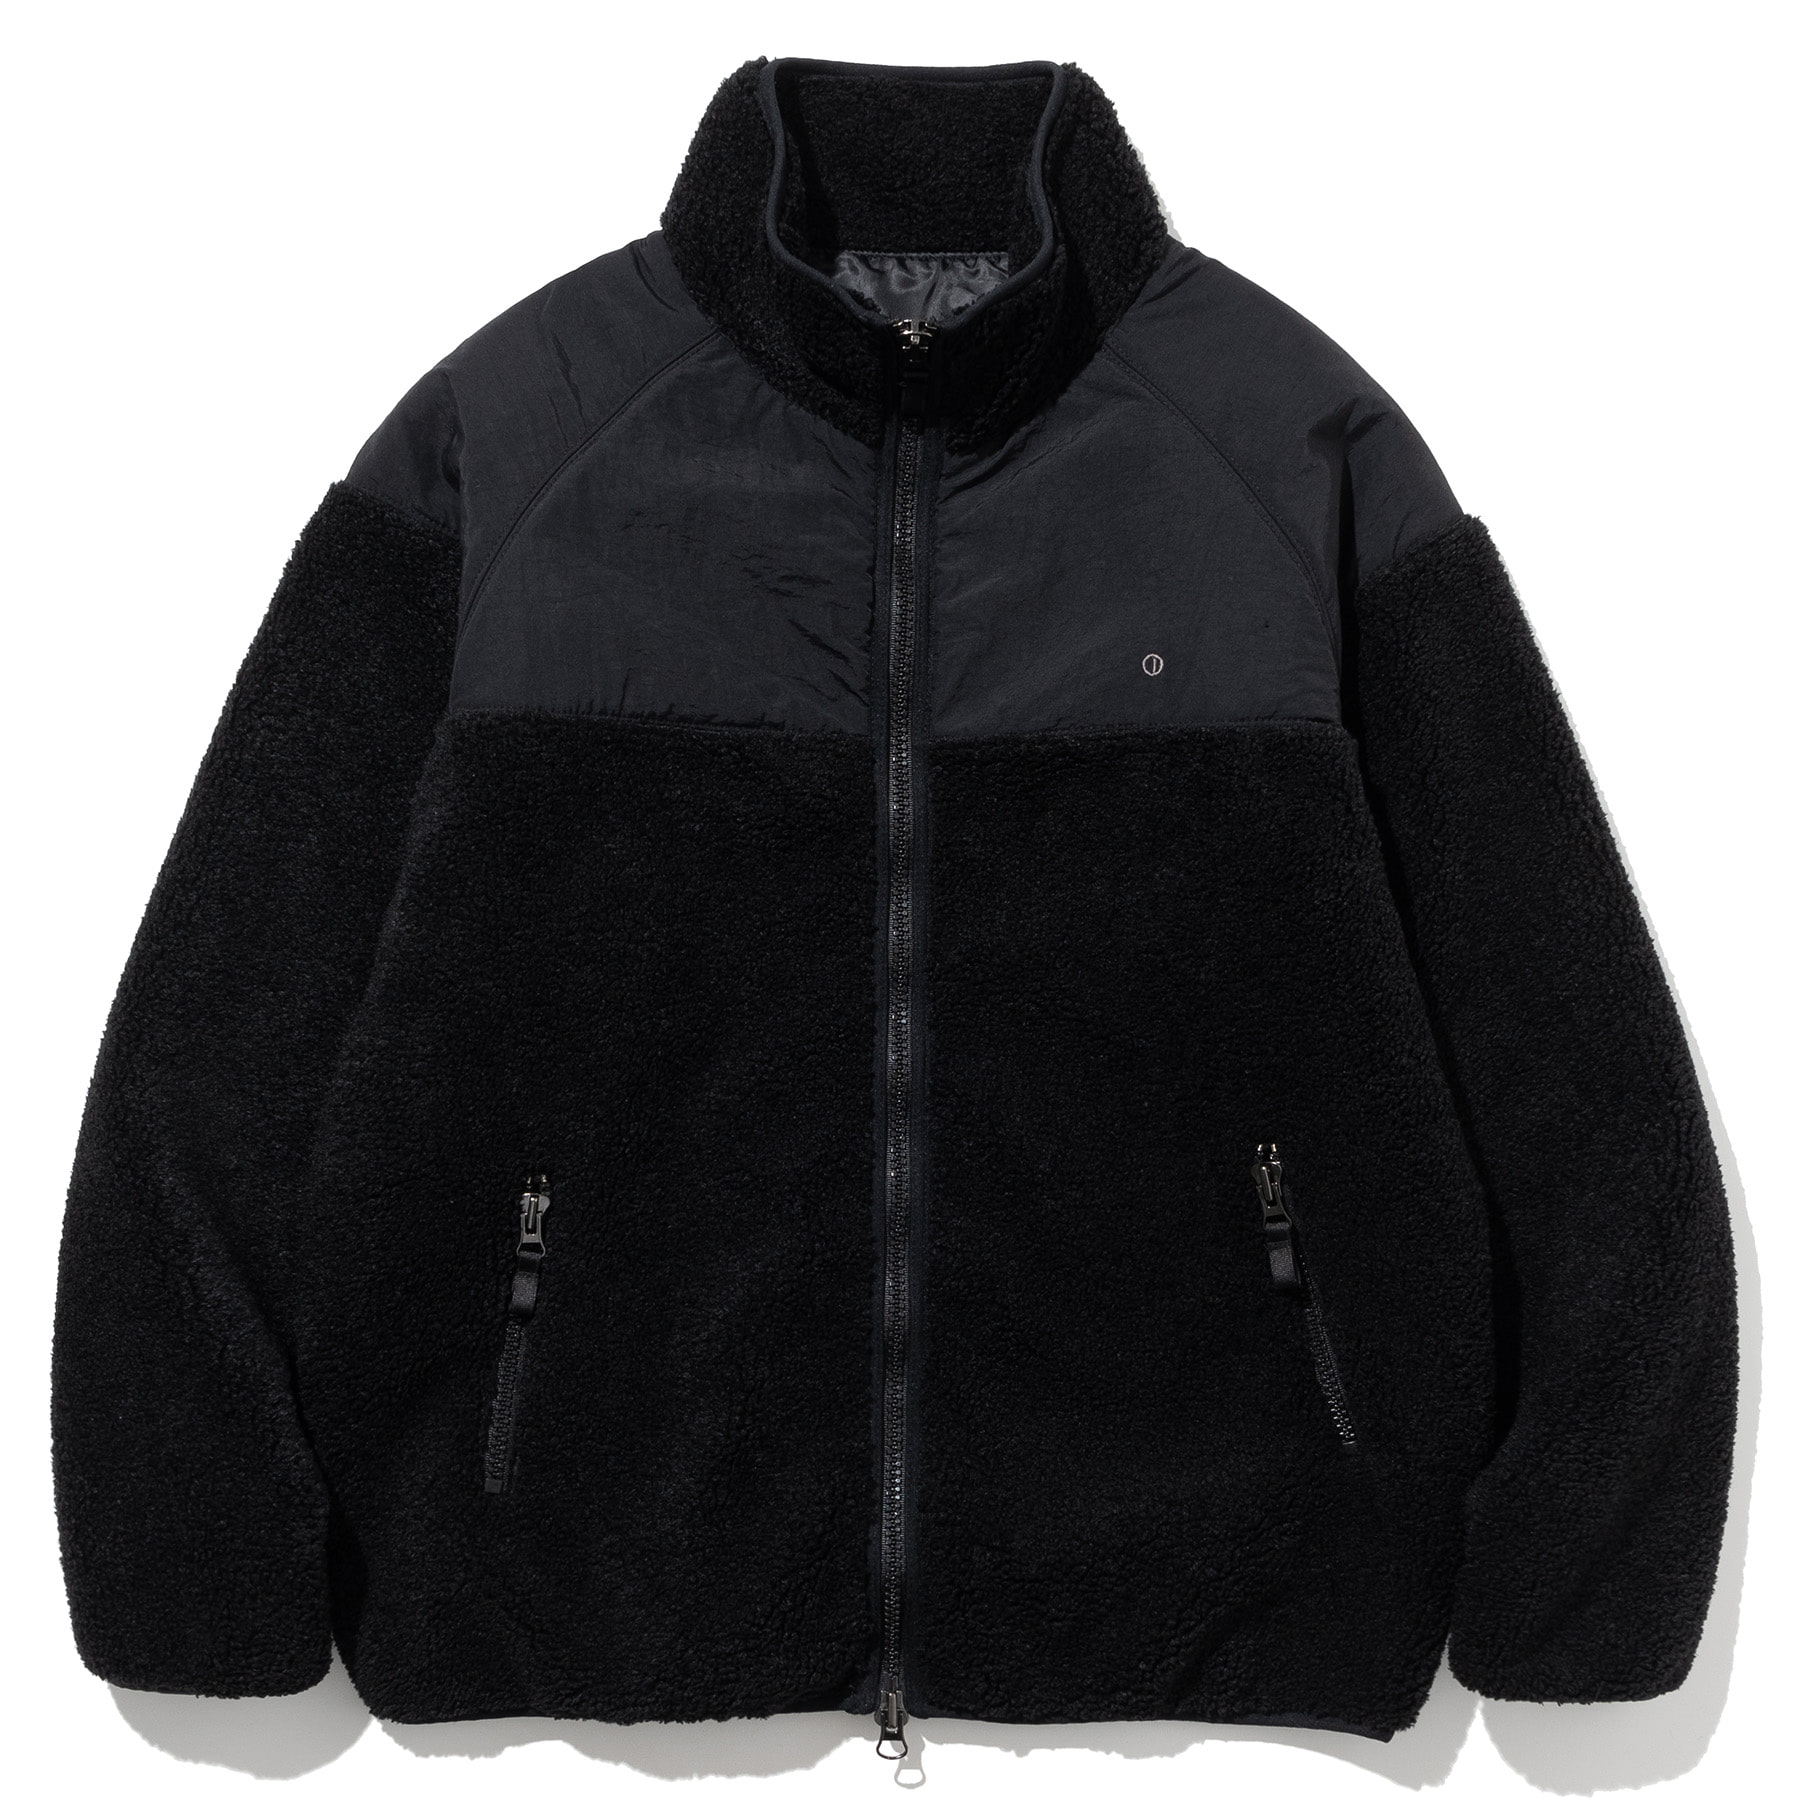 NOT FOR DAILY FLEECE MASCULINE JACKET #1